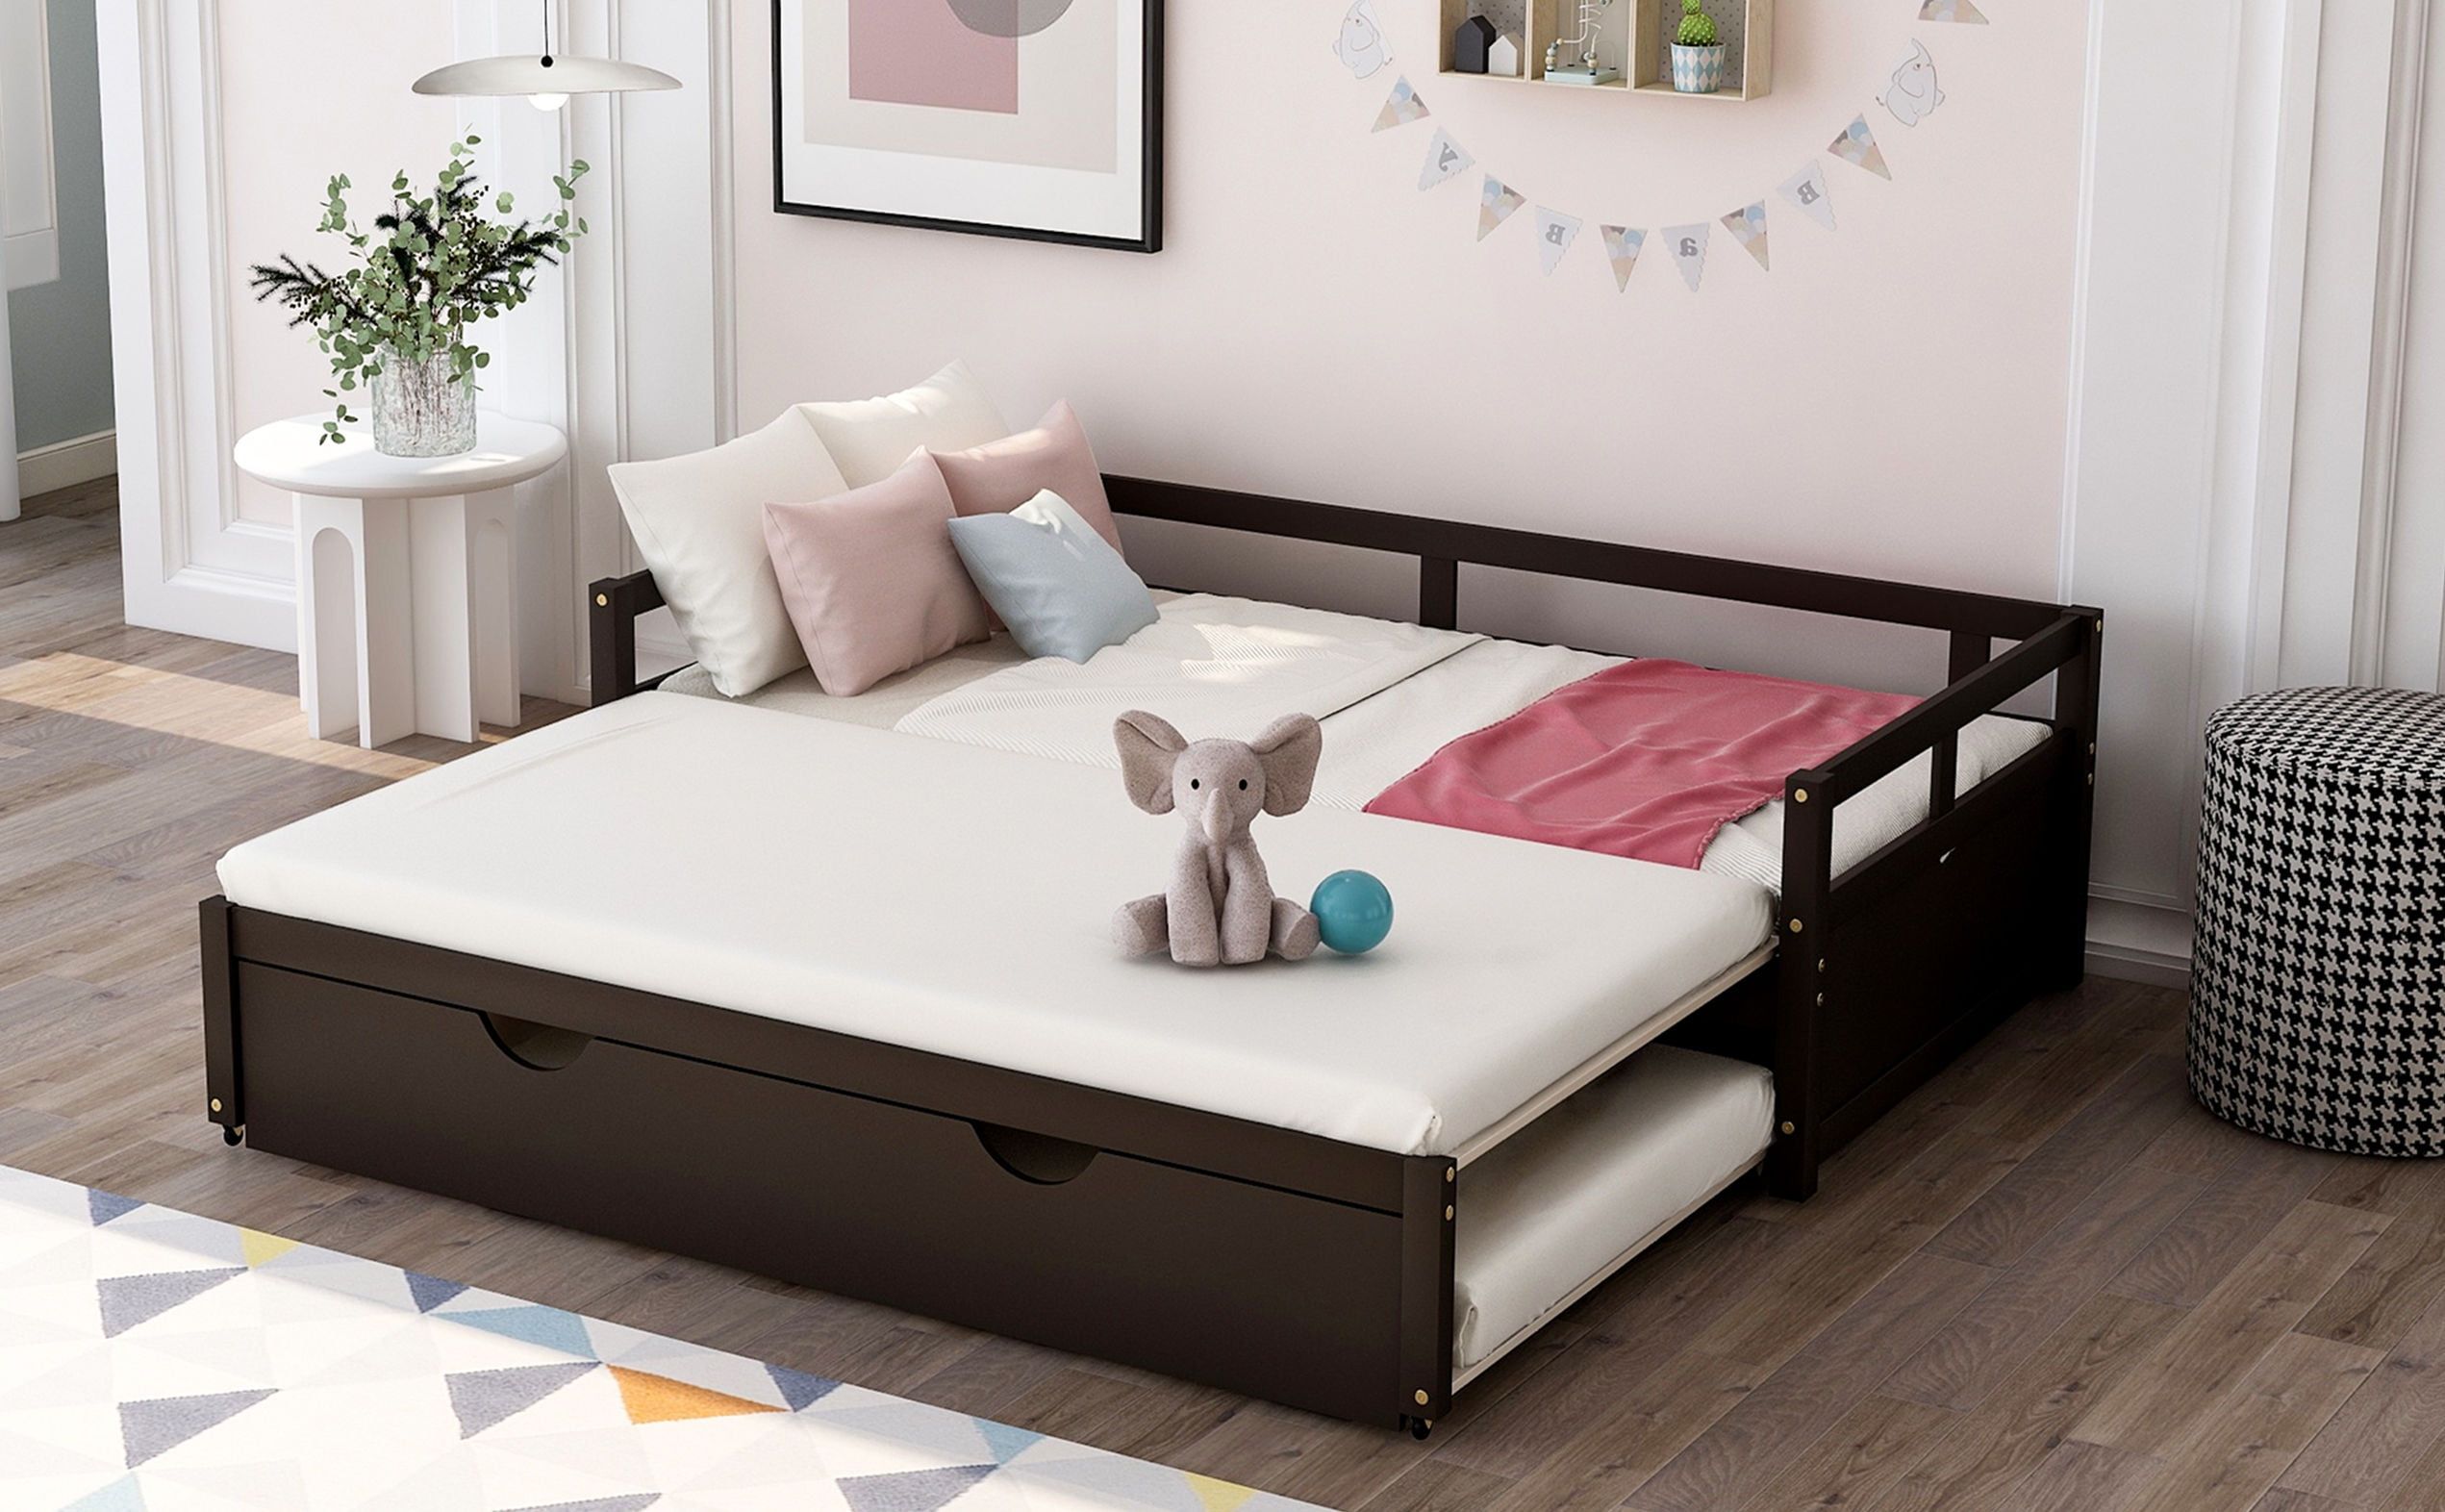 Extending Daybed With Trundle, Wooden Daybed With Trundle, Sofa Bed Pertaining To Children's Sofa Beds (View 15 of 20)